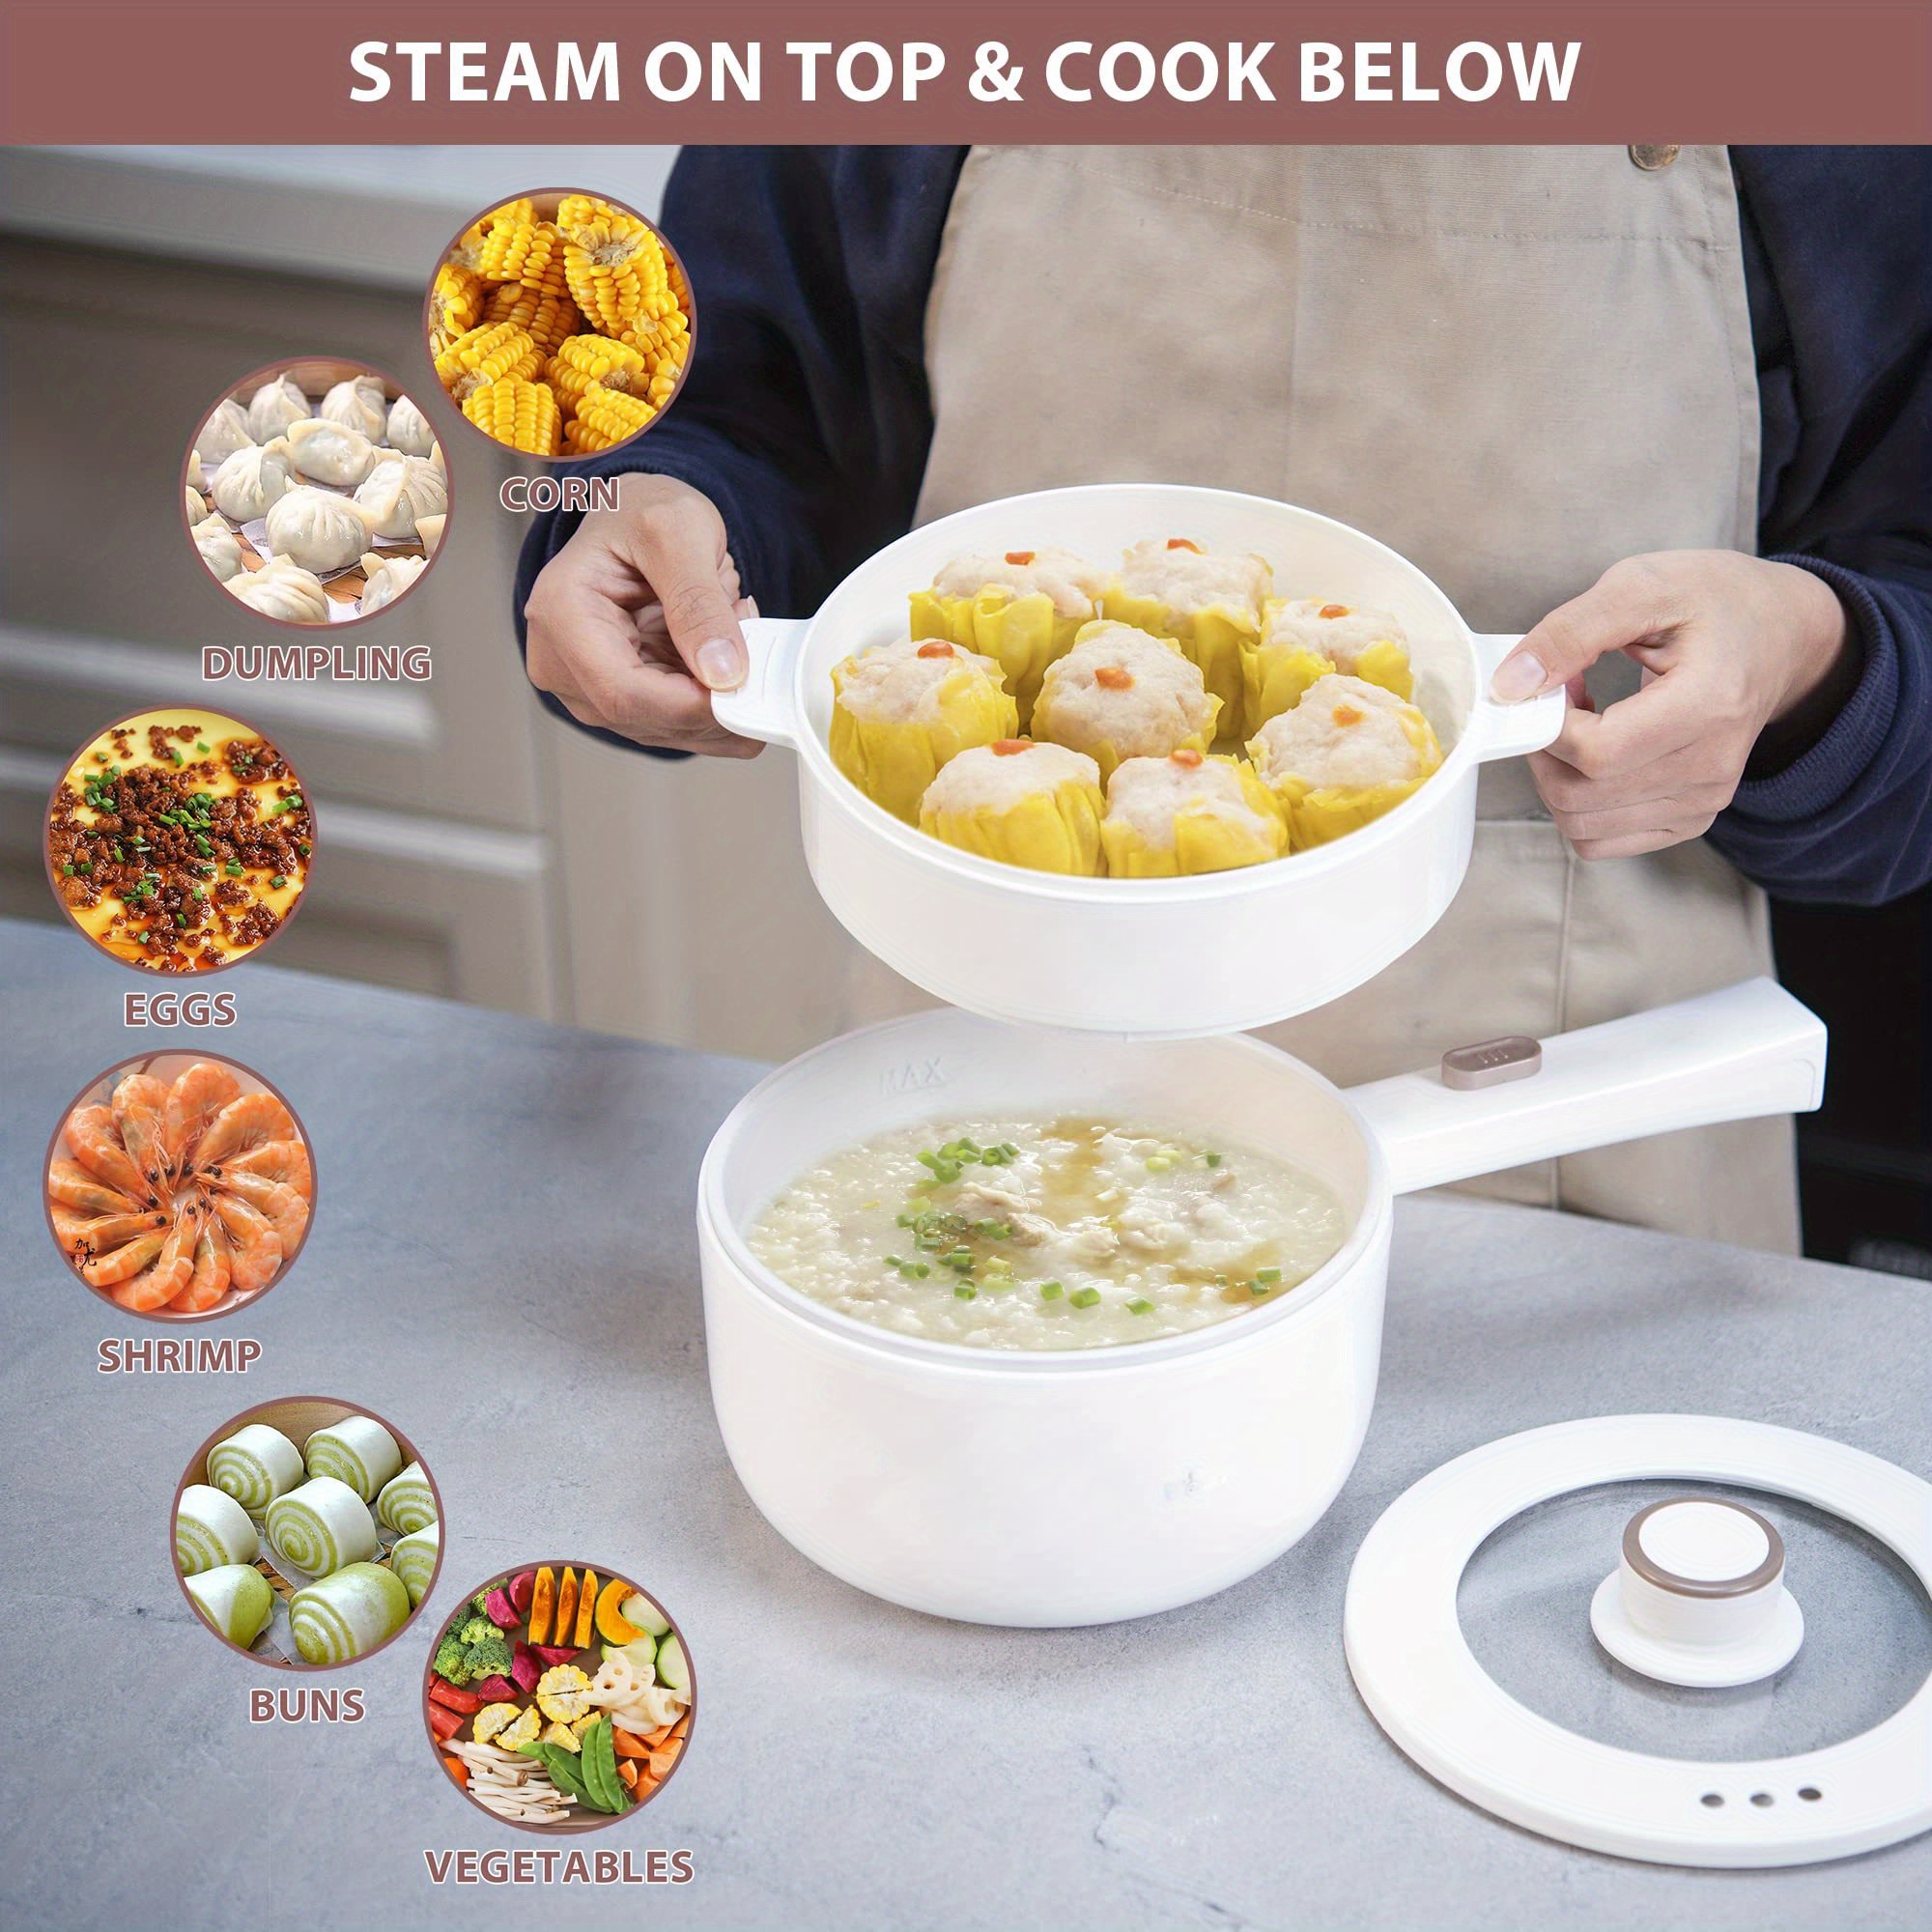 Bear Electric Hot Pot With Steamer Rapid Noodles Cooker And - Temu